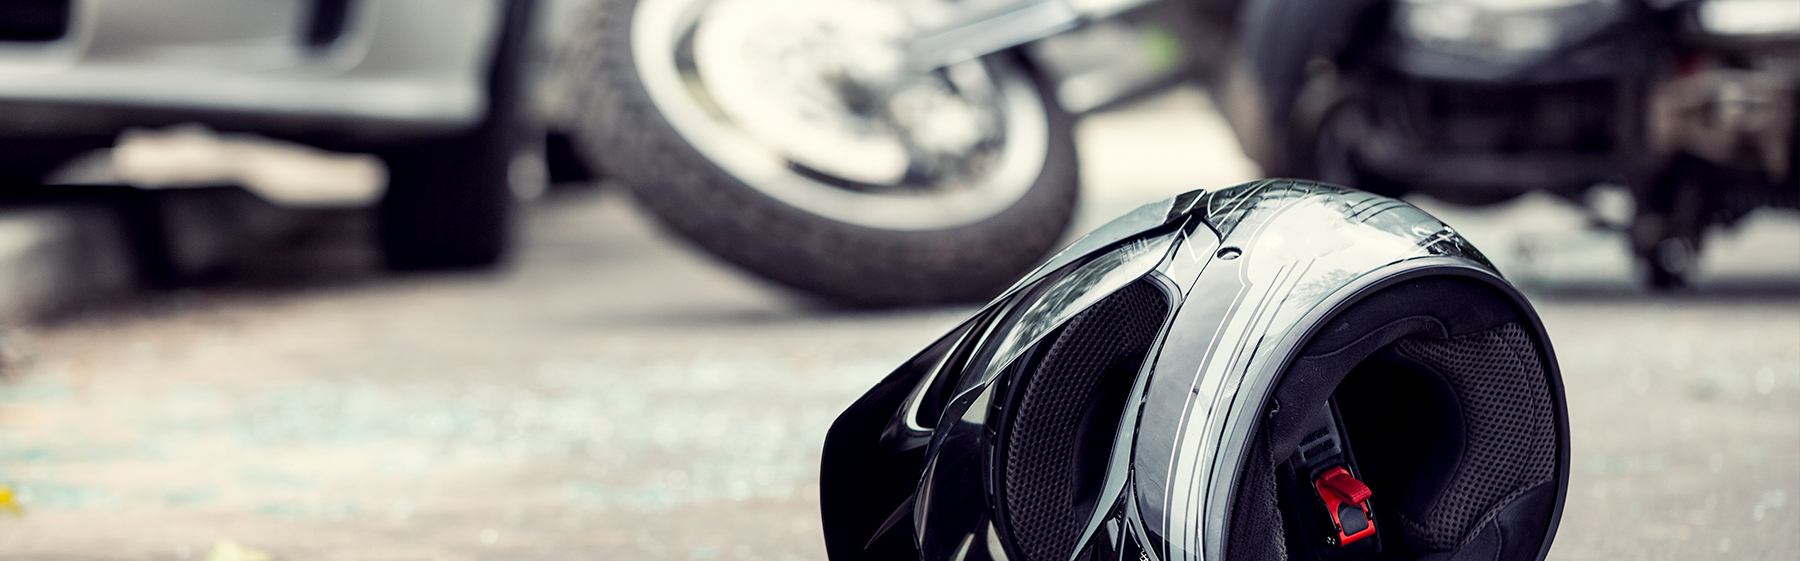 Why It Is Important To Hire An Injury Lawyer After Being Injured In A Motorcycle Accident